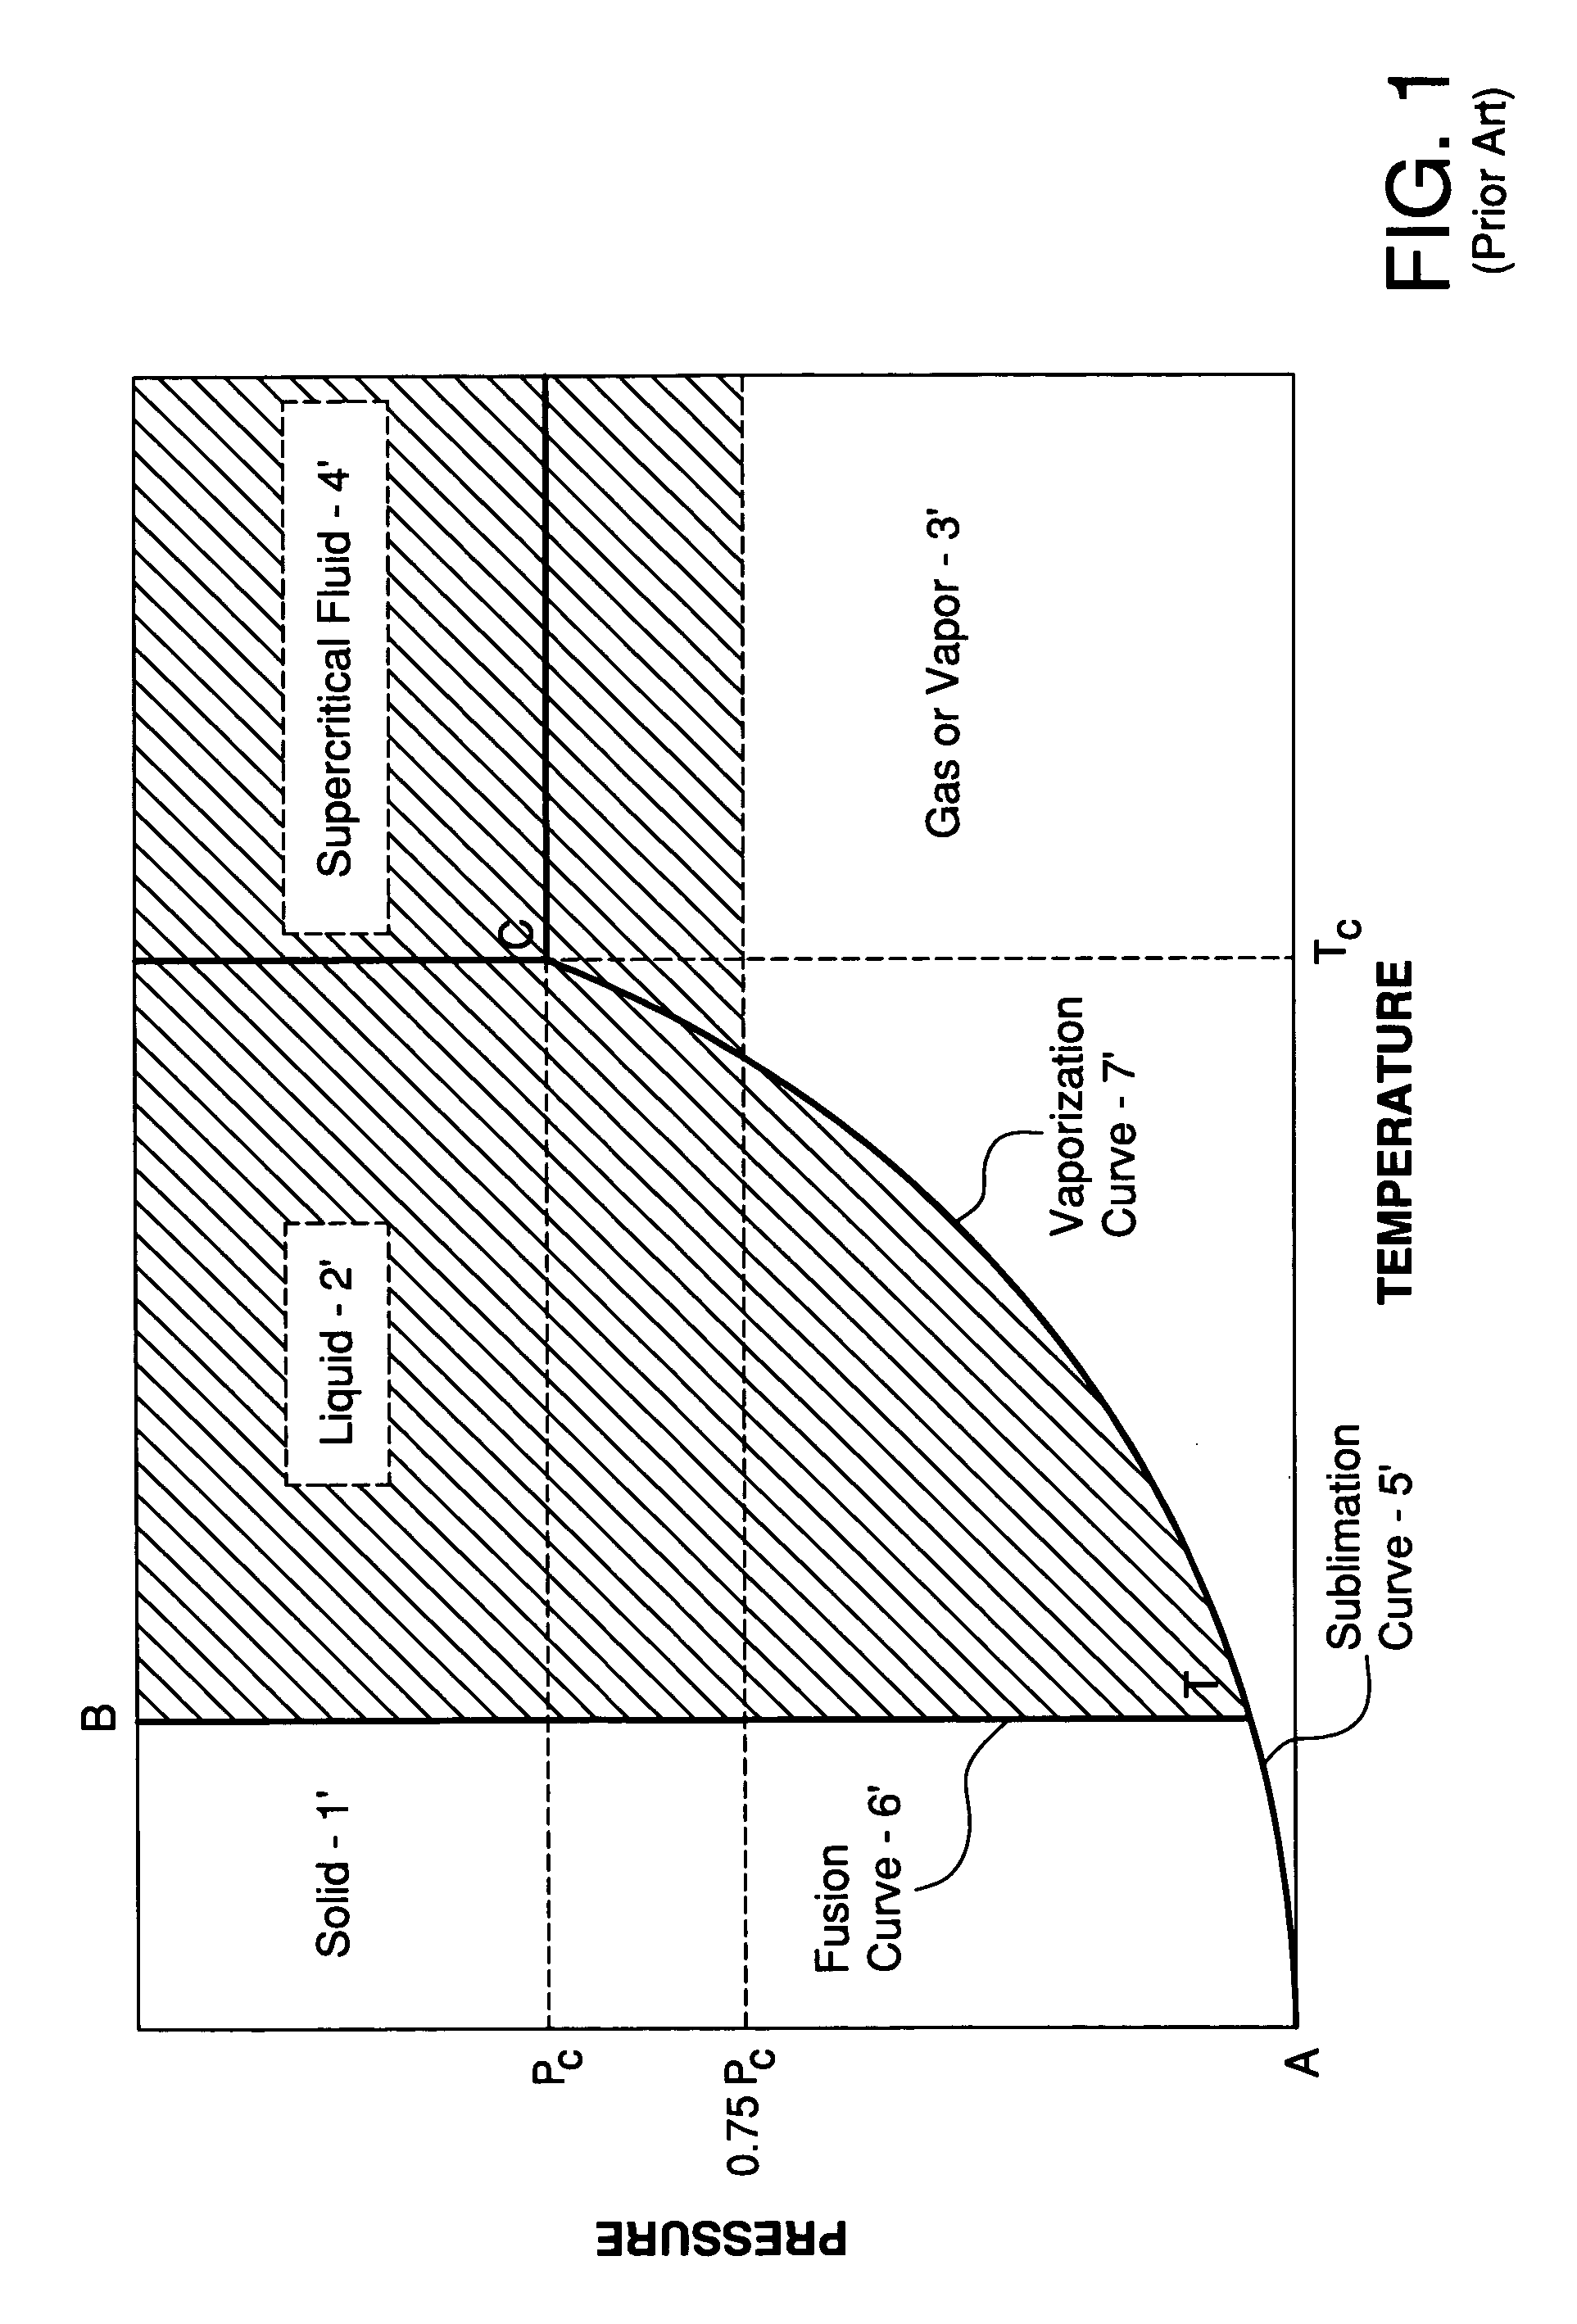 Processing of semiconductor components with dense processing fluids and ultrasonic energy